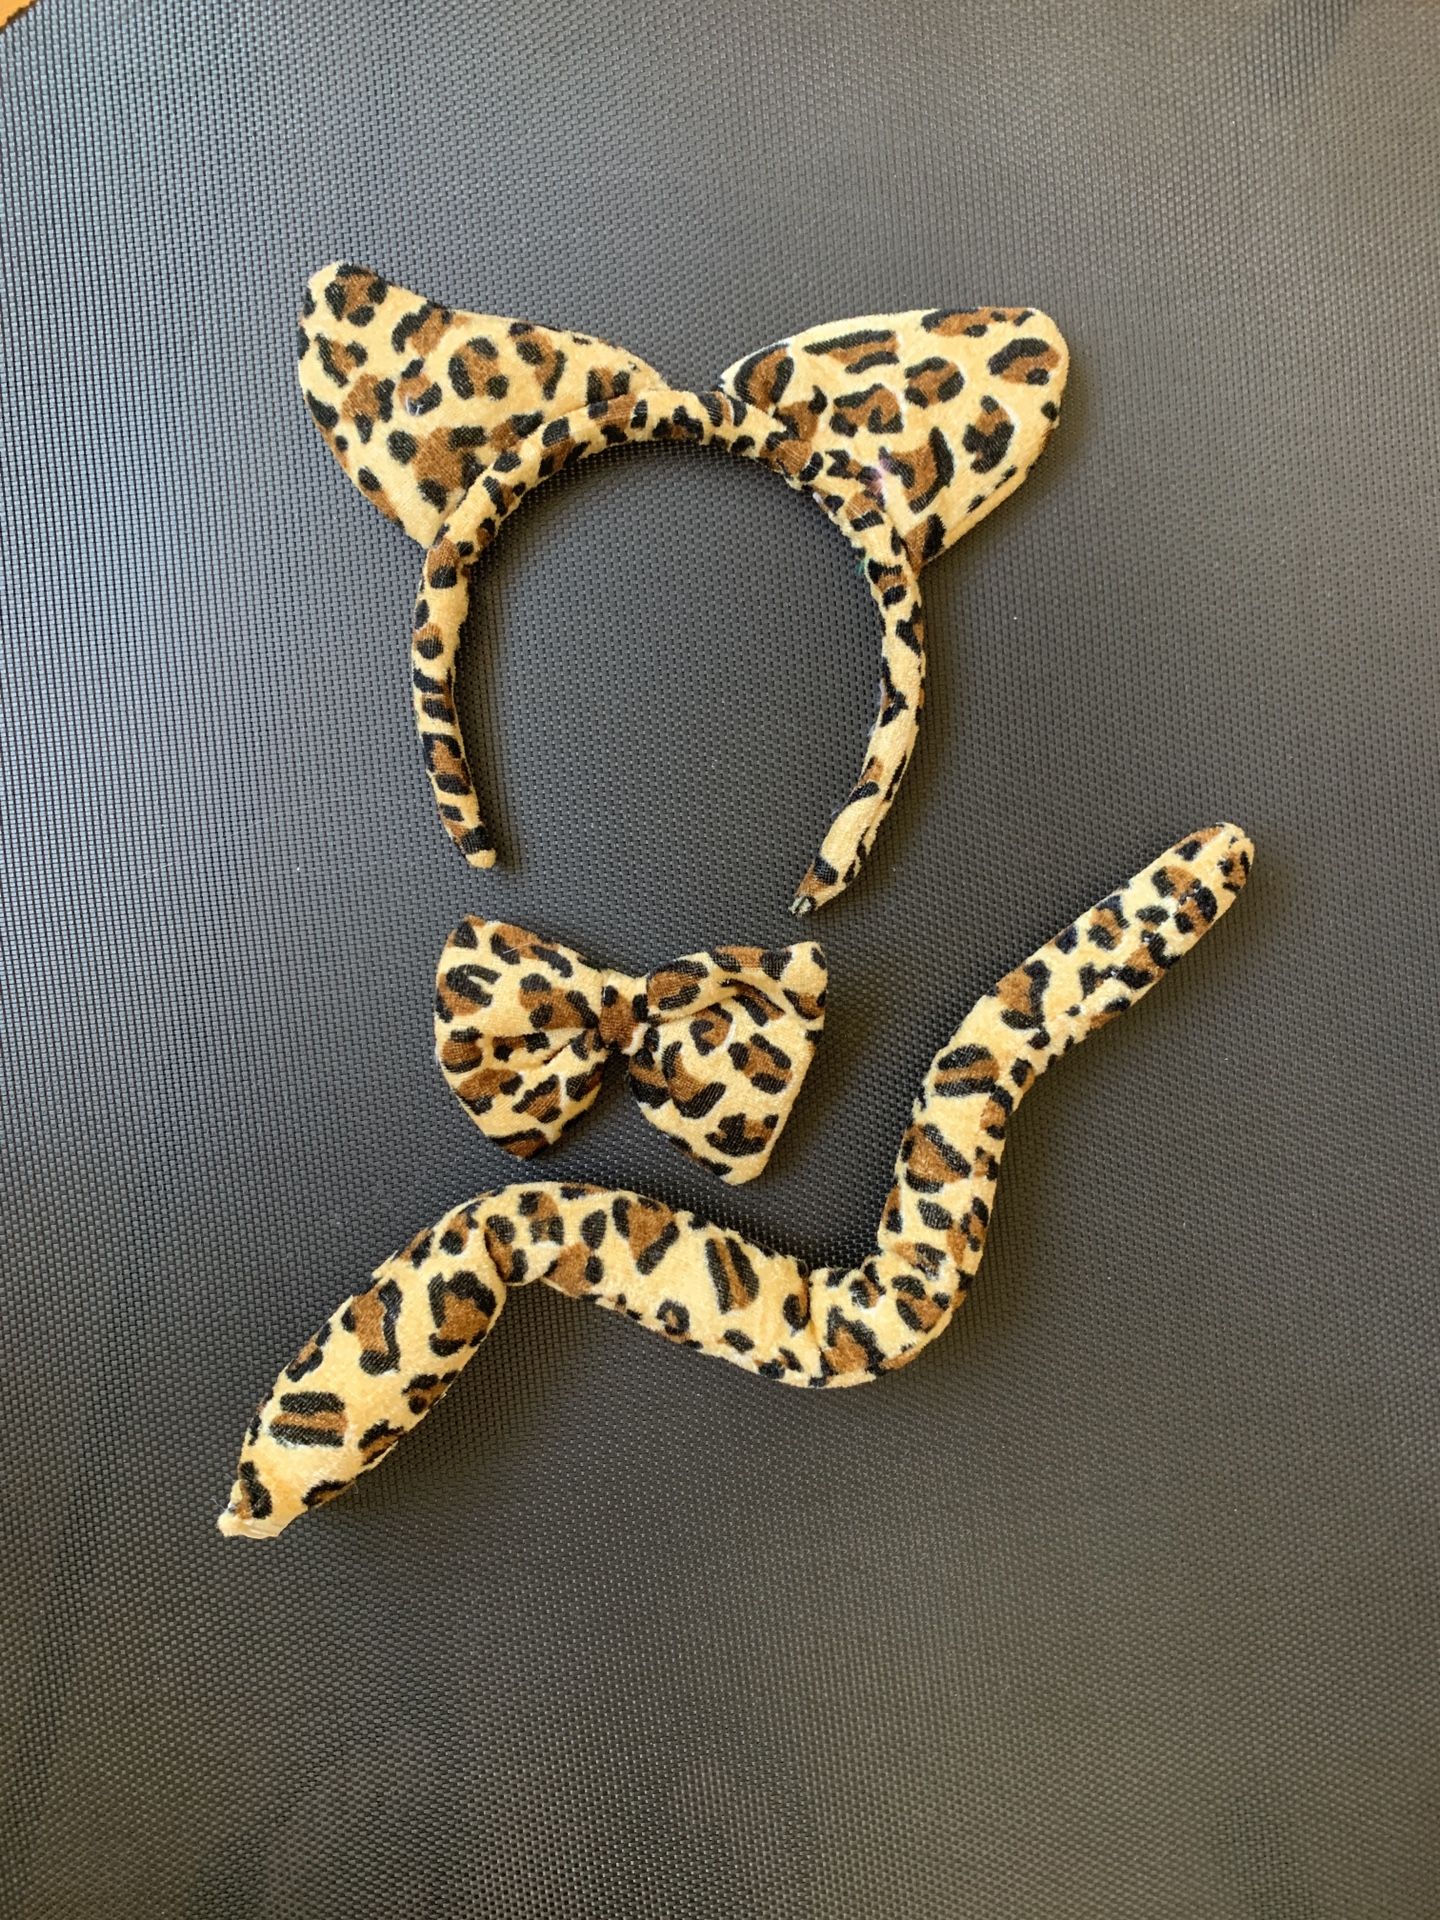 Leopard Cat Ears and Tail and Bow Tie Halloween Costume